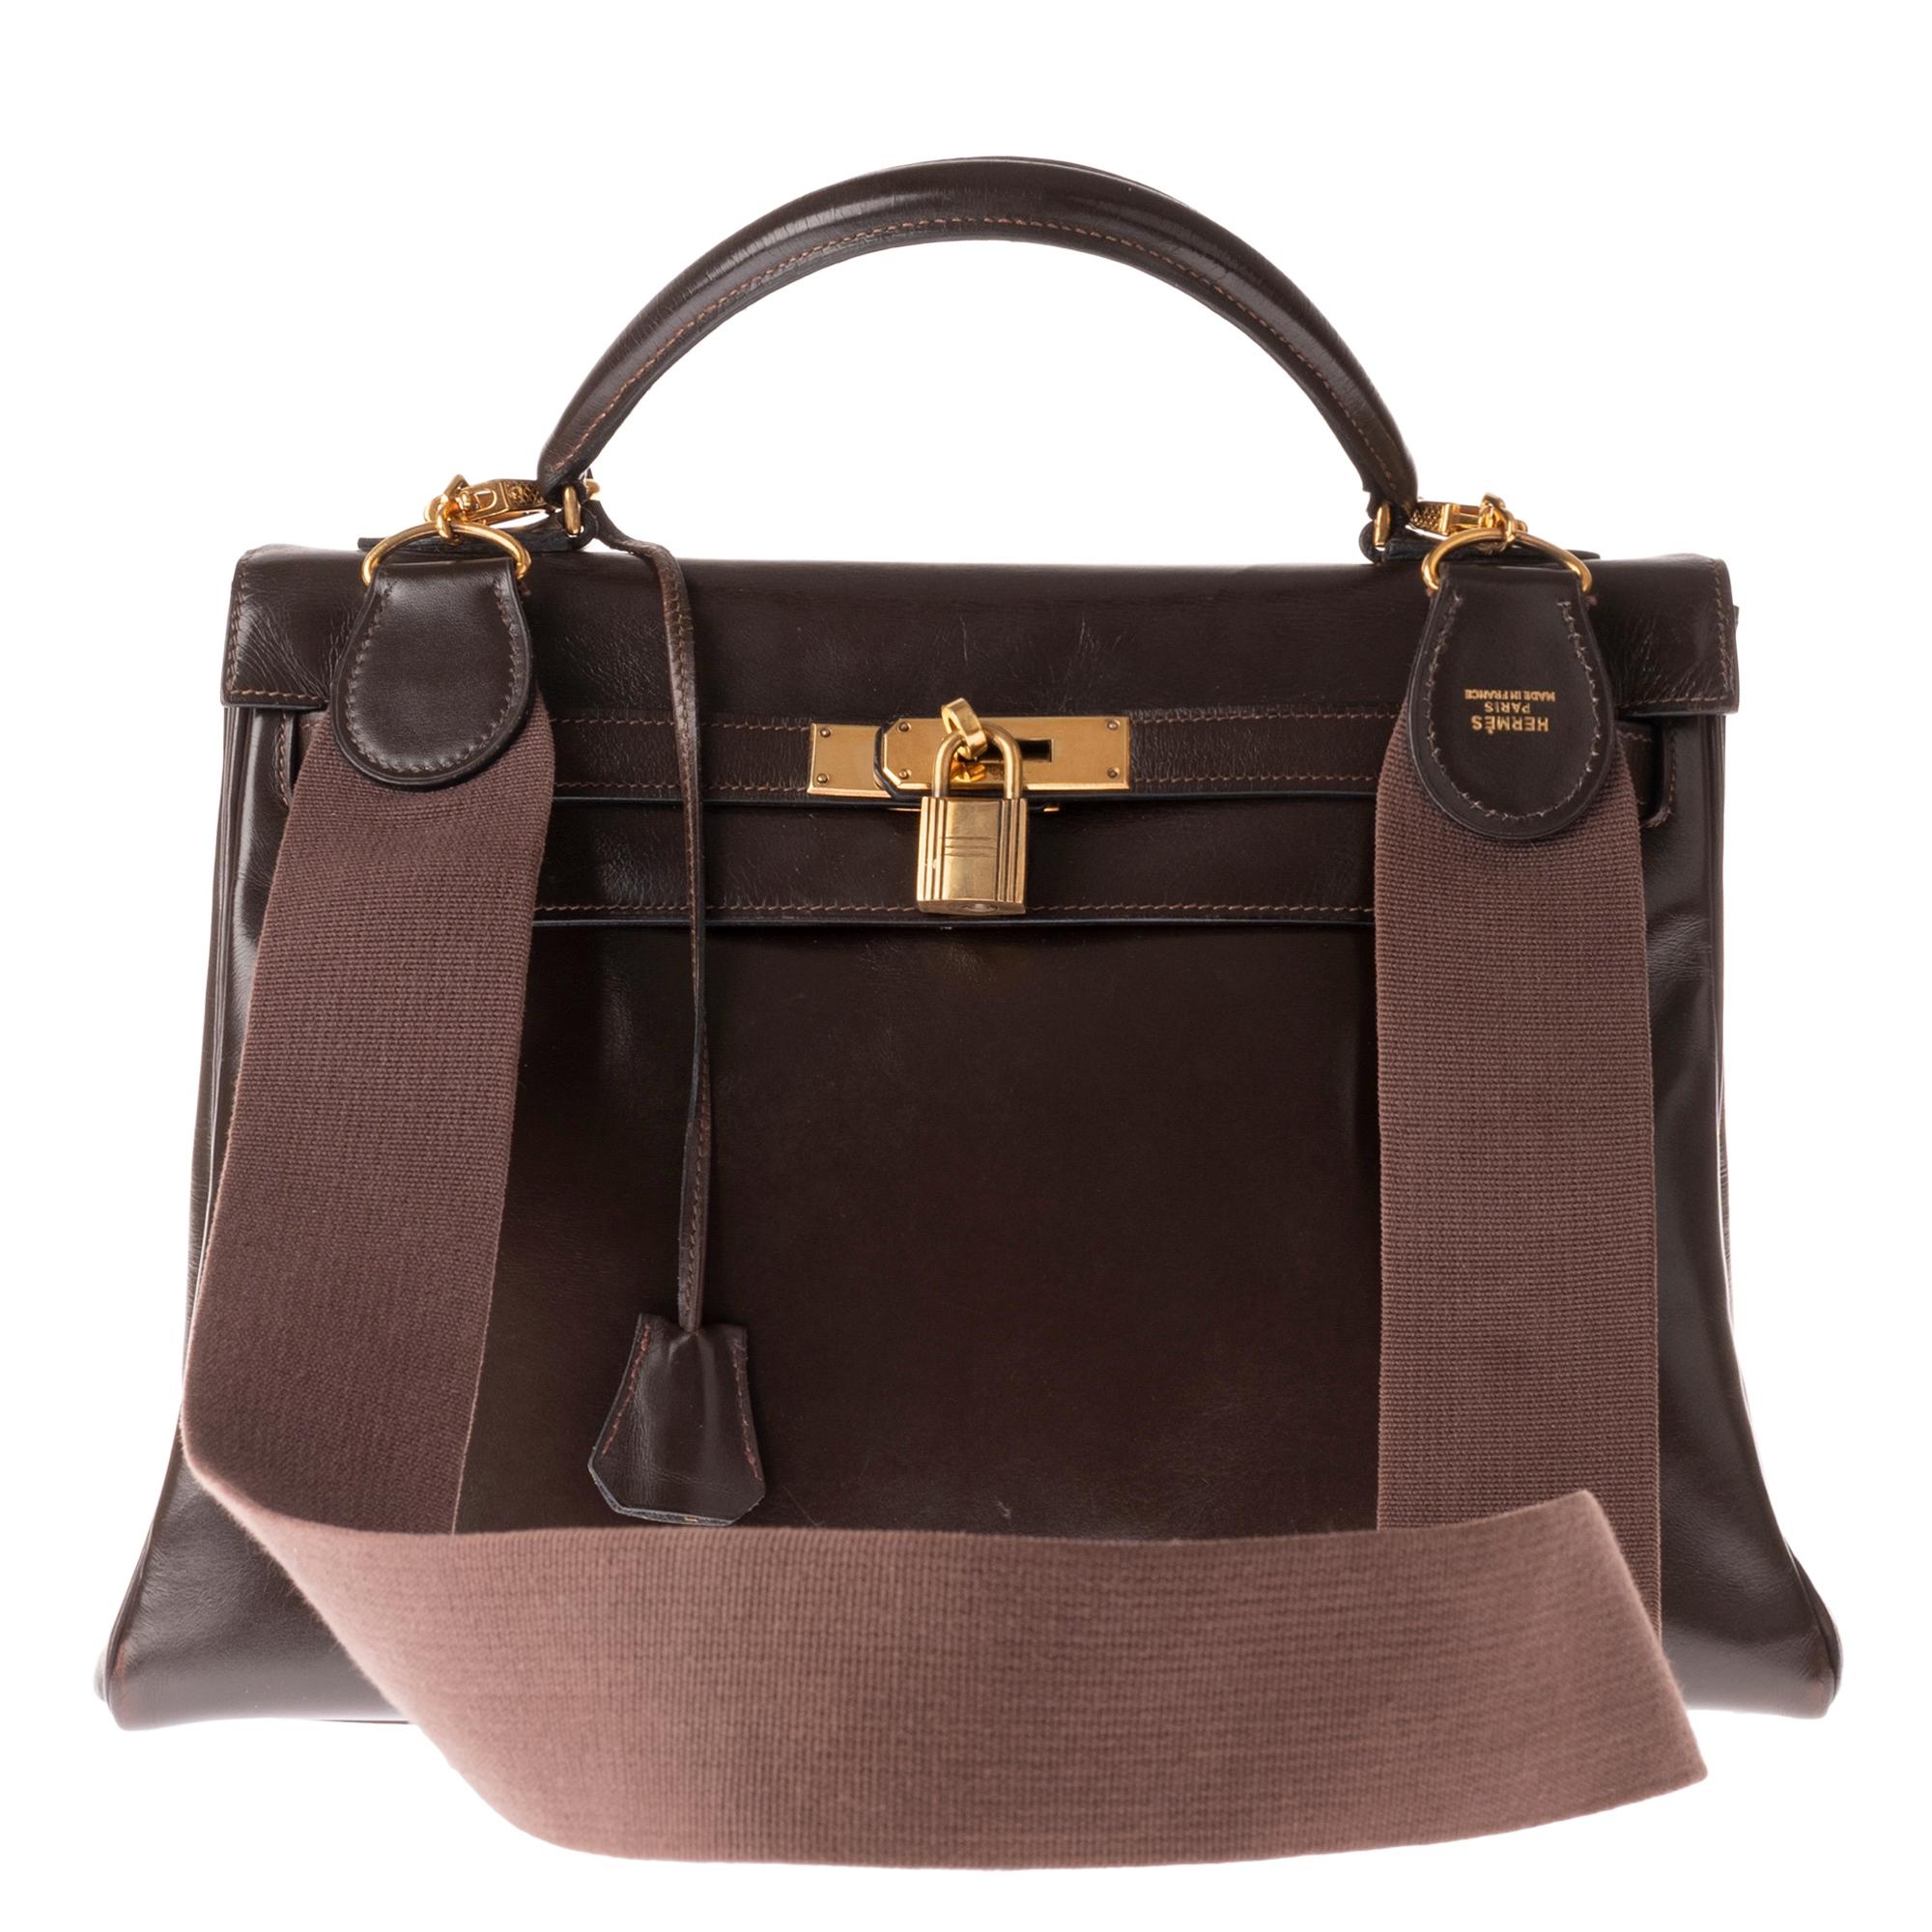 Hermès Kelly 32 handbag retourné vintage in brown calfskin leather with shoulder strap, gold plated hardware, single brown leather handle handle sport leather shoulder strap and canvas for carrying hand or shoulder.
Closure by flap.
Interior lining